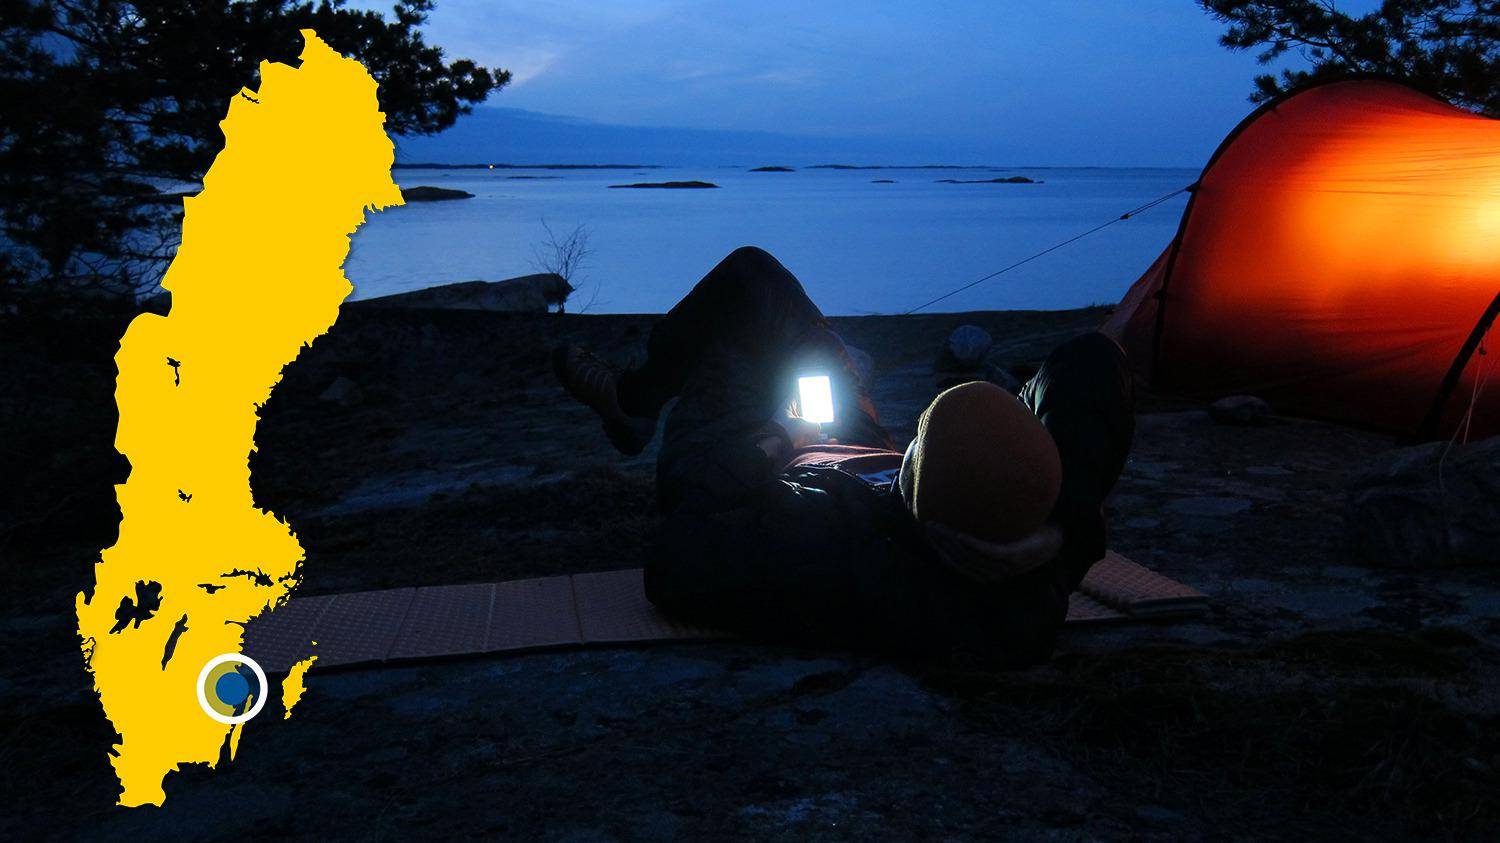 A tent is set up on a beach near the water. It is night and a person is lying next to the tent looking at his phone.